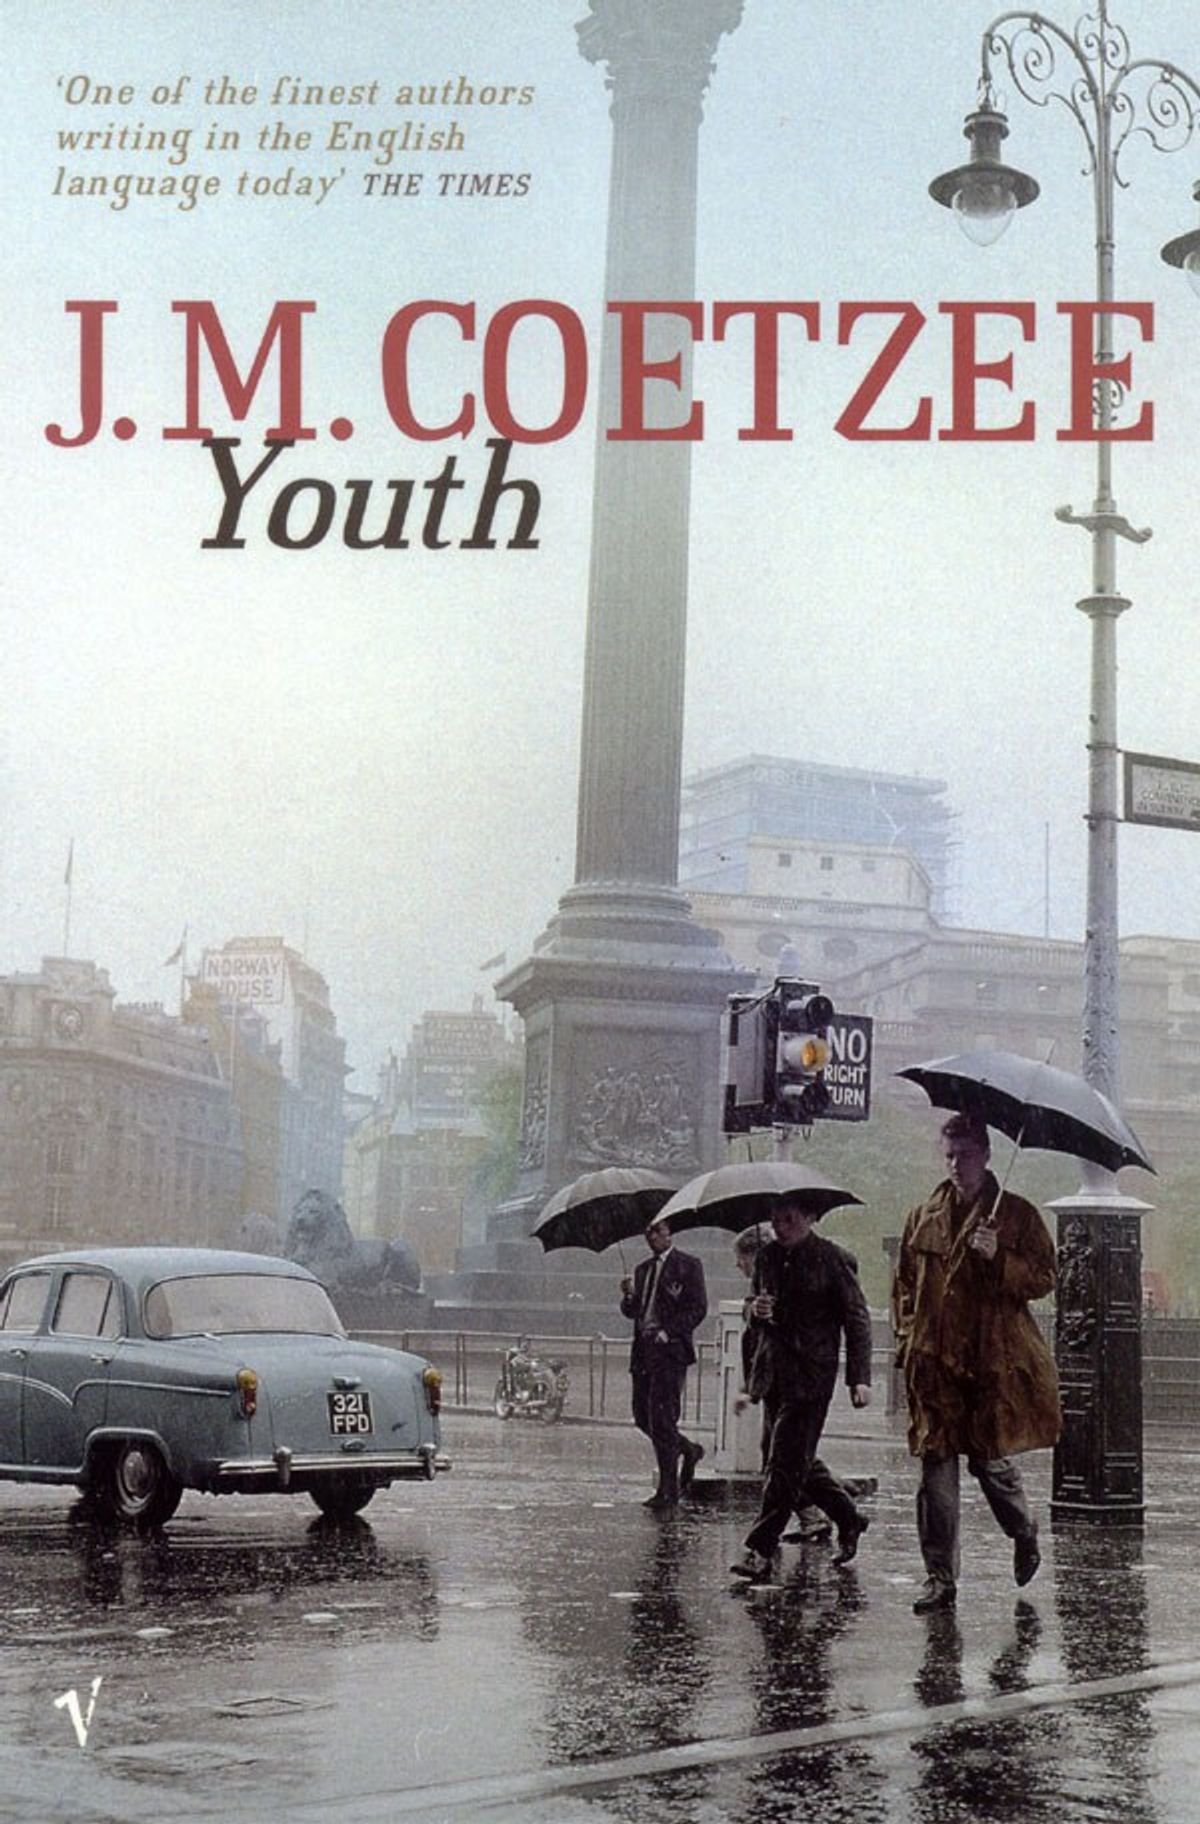 The Perfect Imperfections of J.M Coetzee's 'Youth'